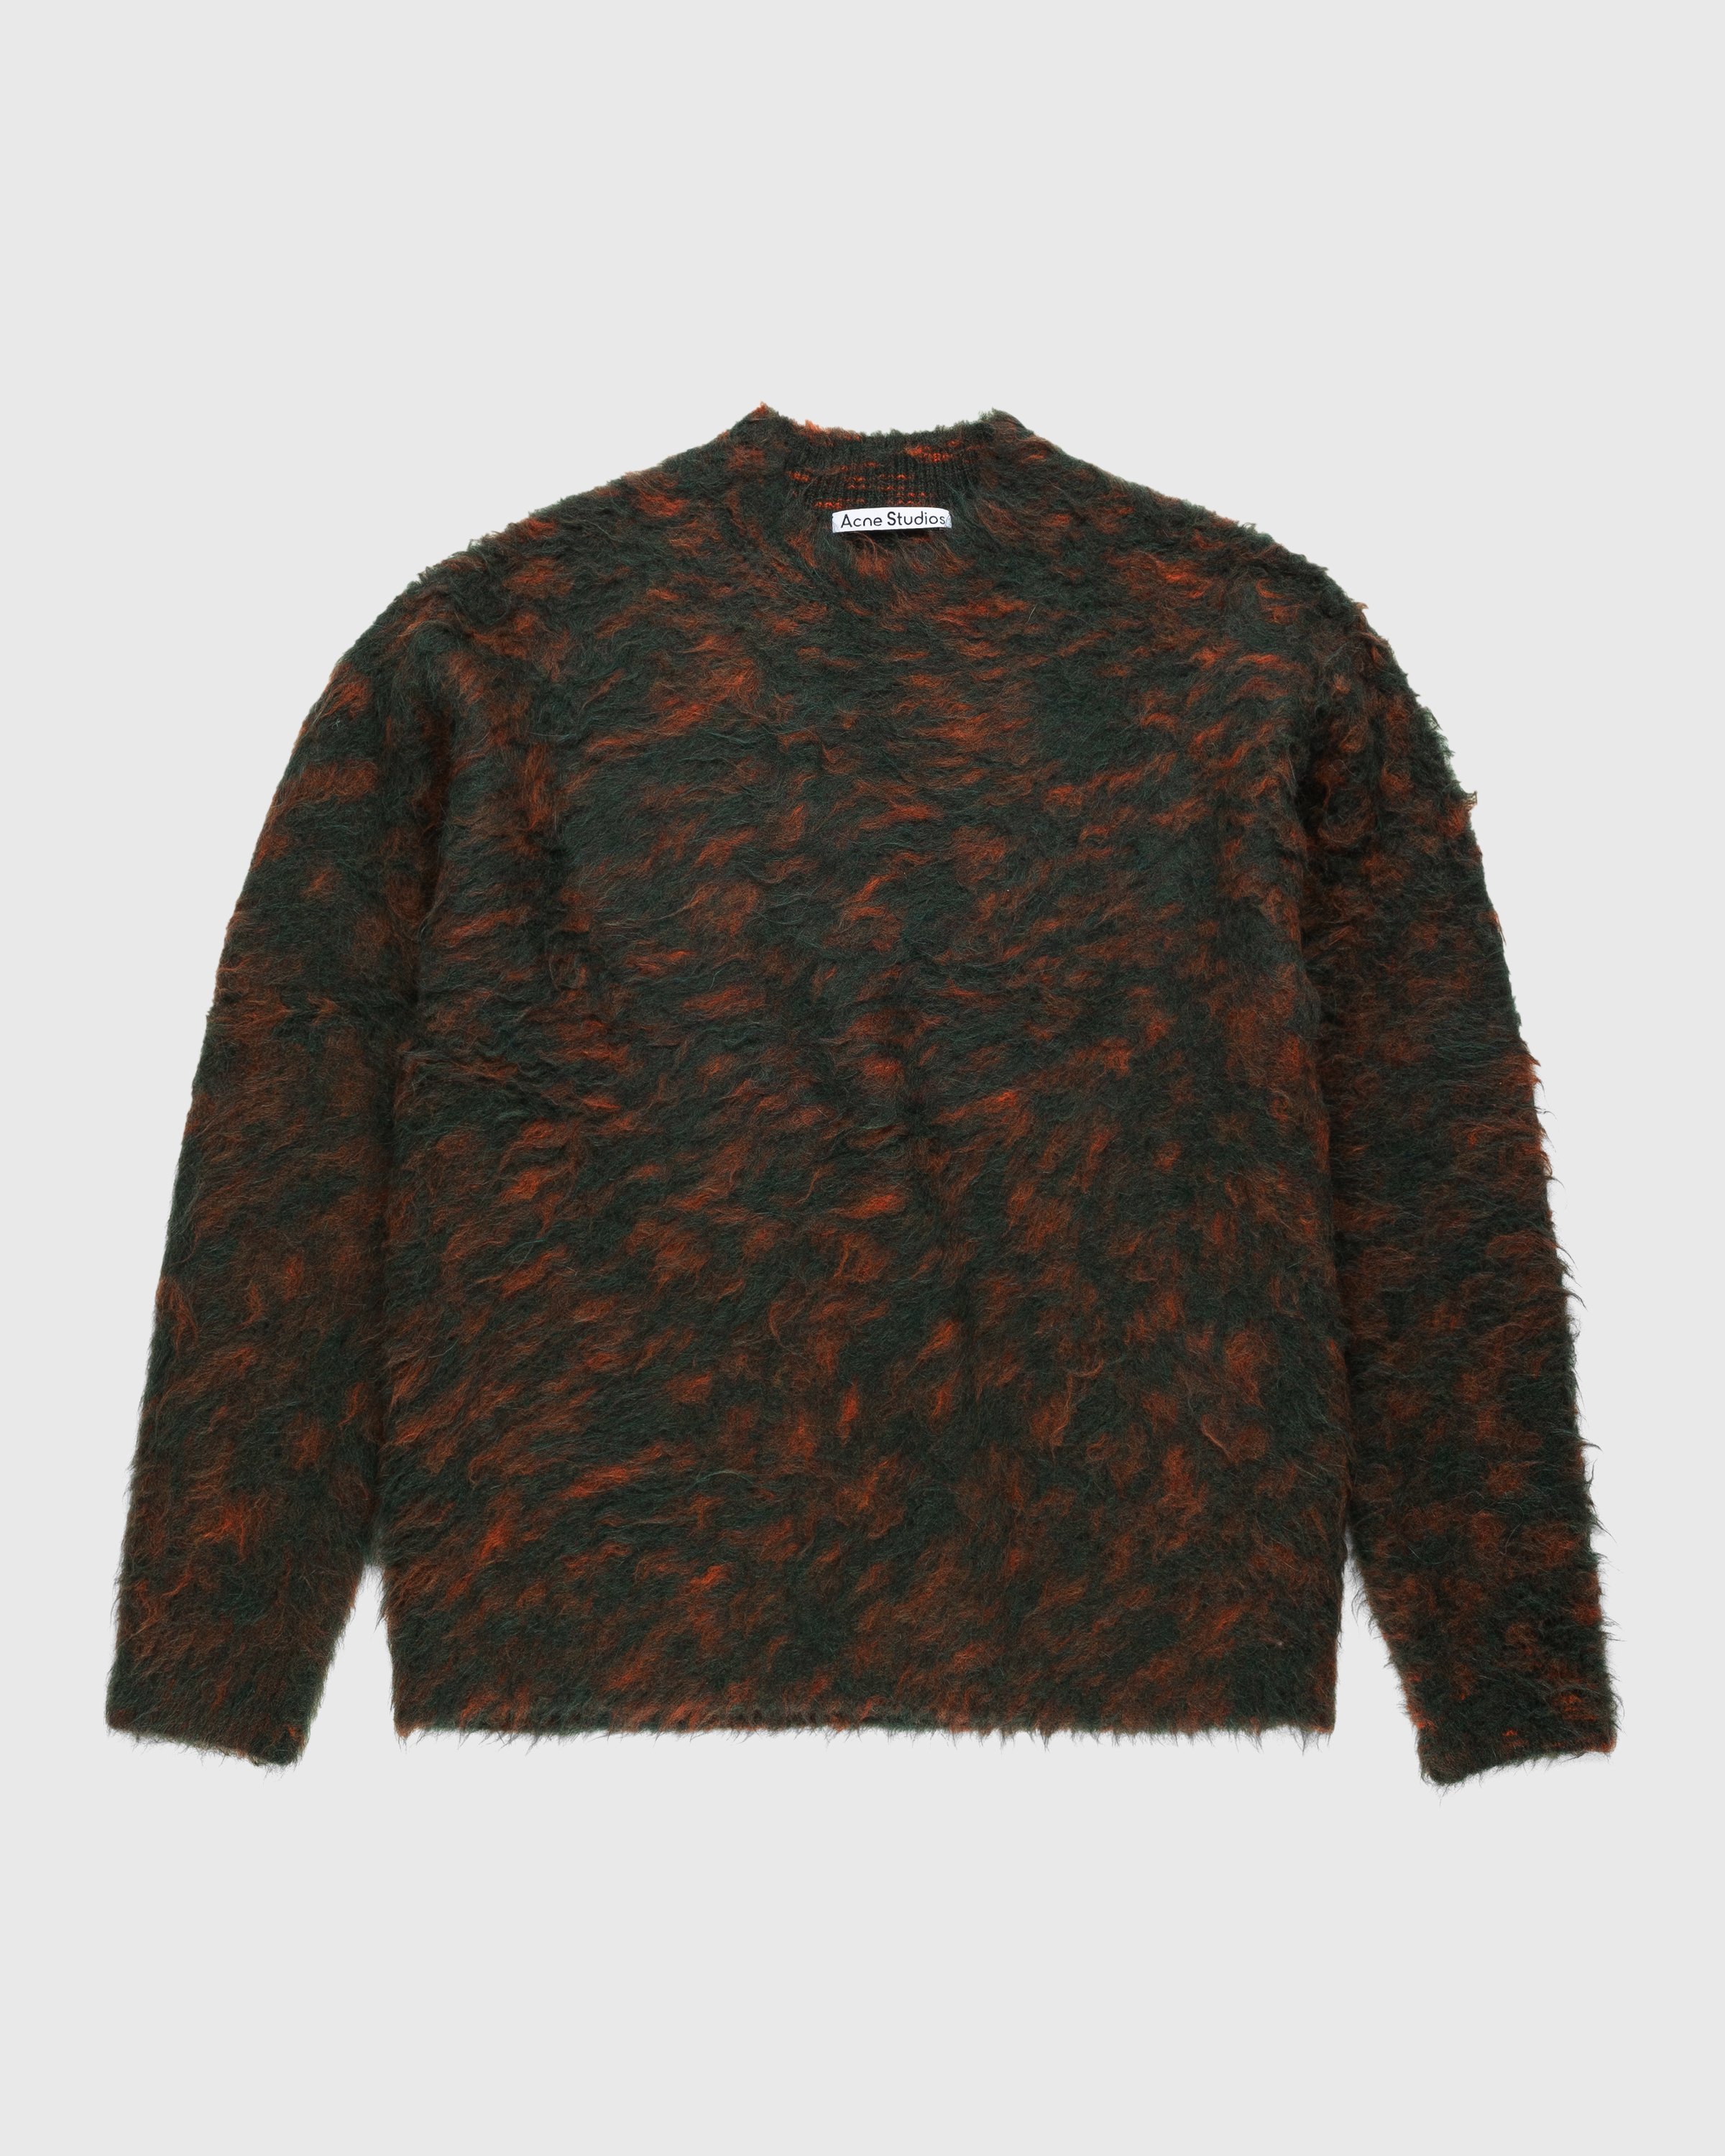 Acne Studios - Hairy Crewneck Sweater Green - Clothing - Green - Image 1